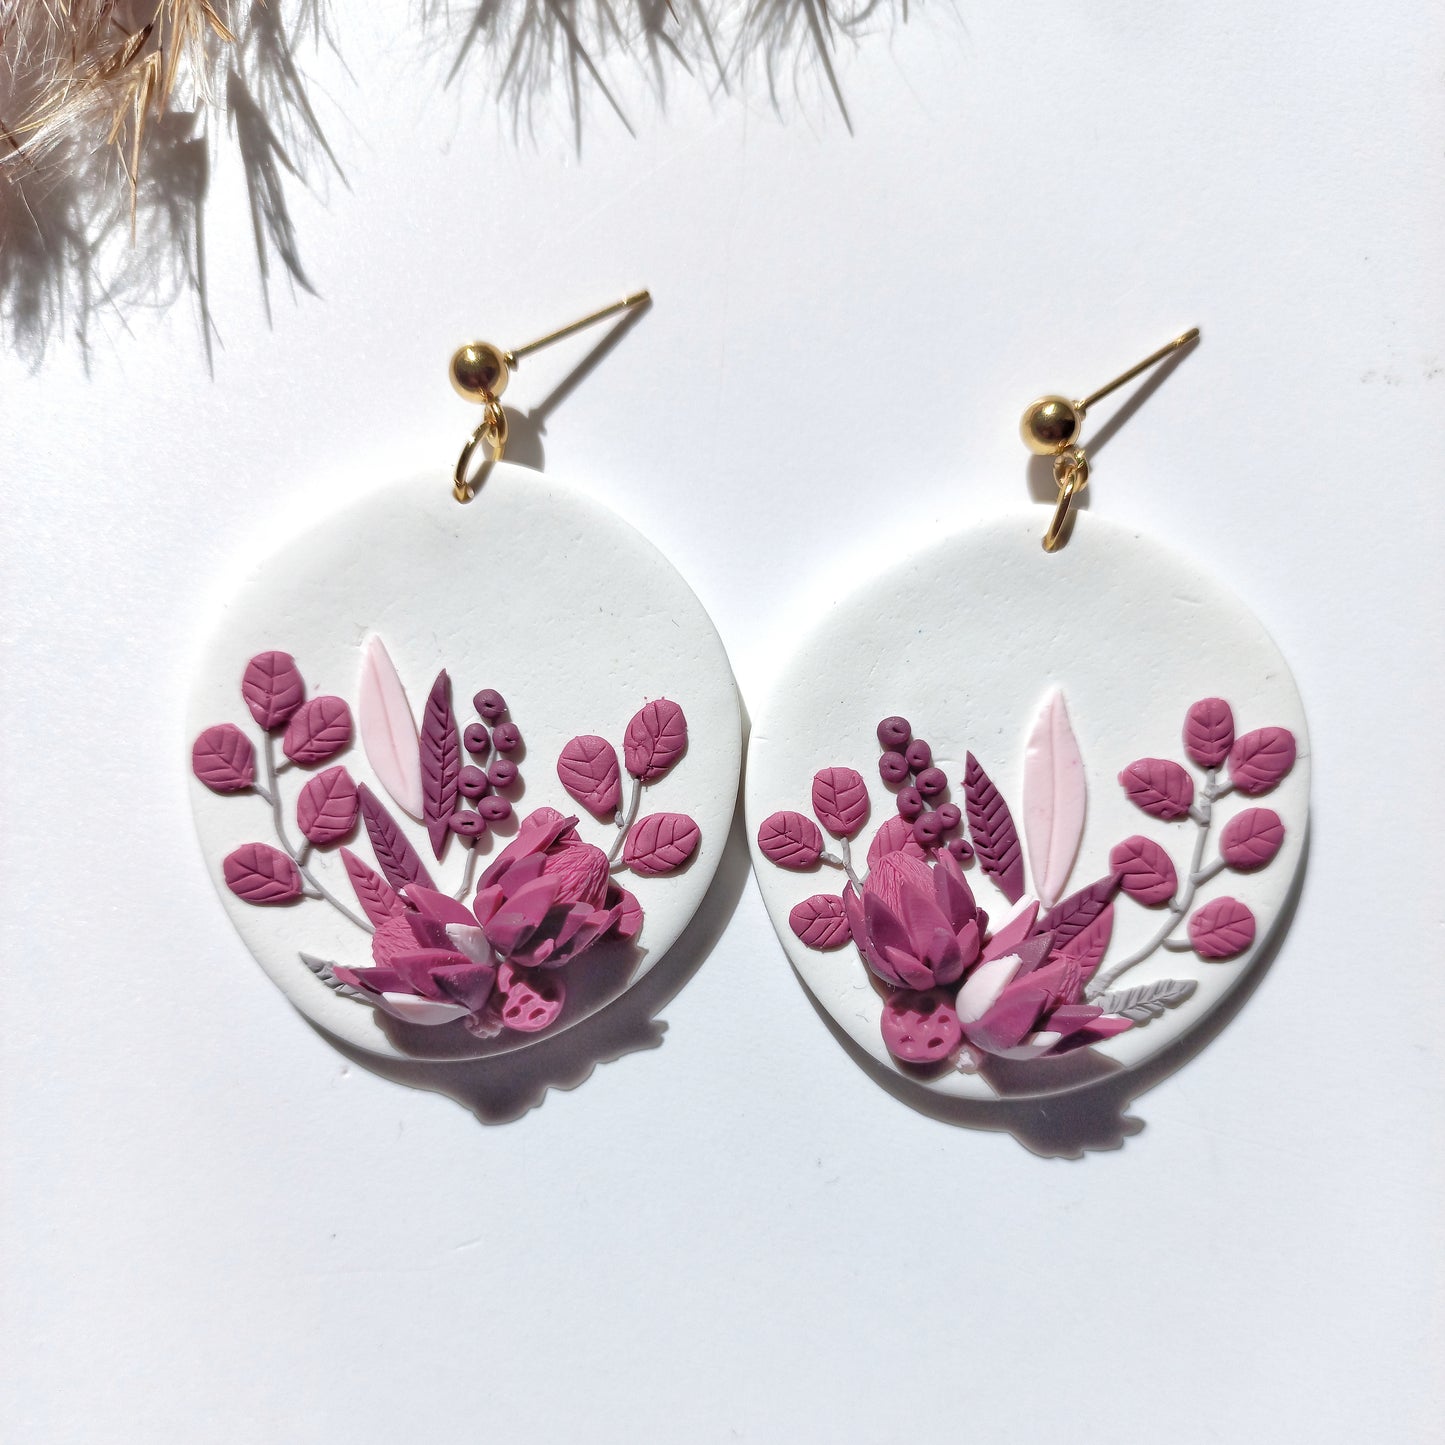 Chaska Protea - Large Circle Earring with stainless steel gold ball stud